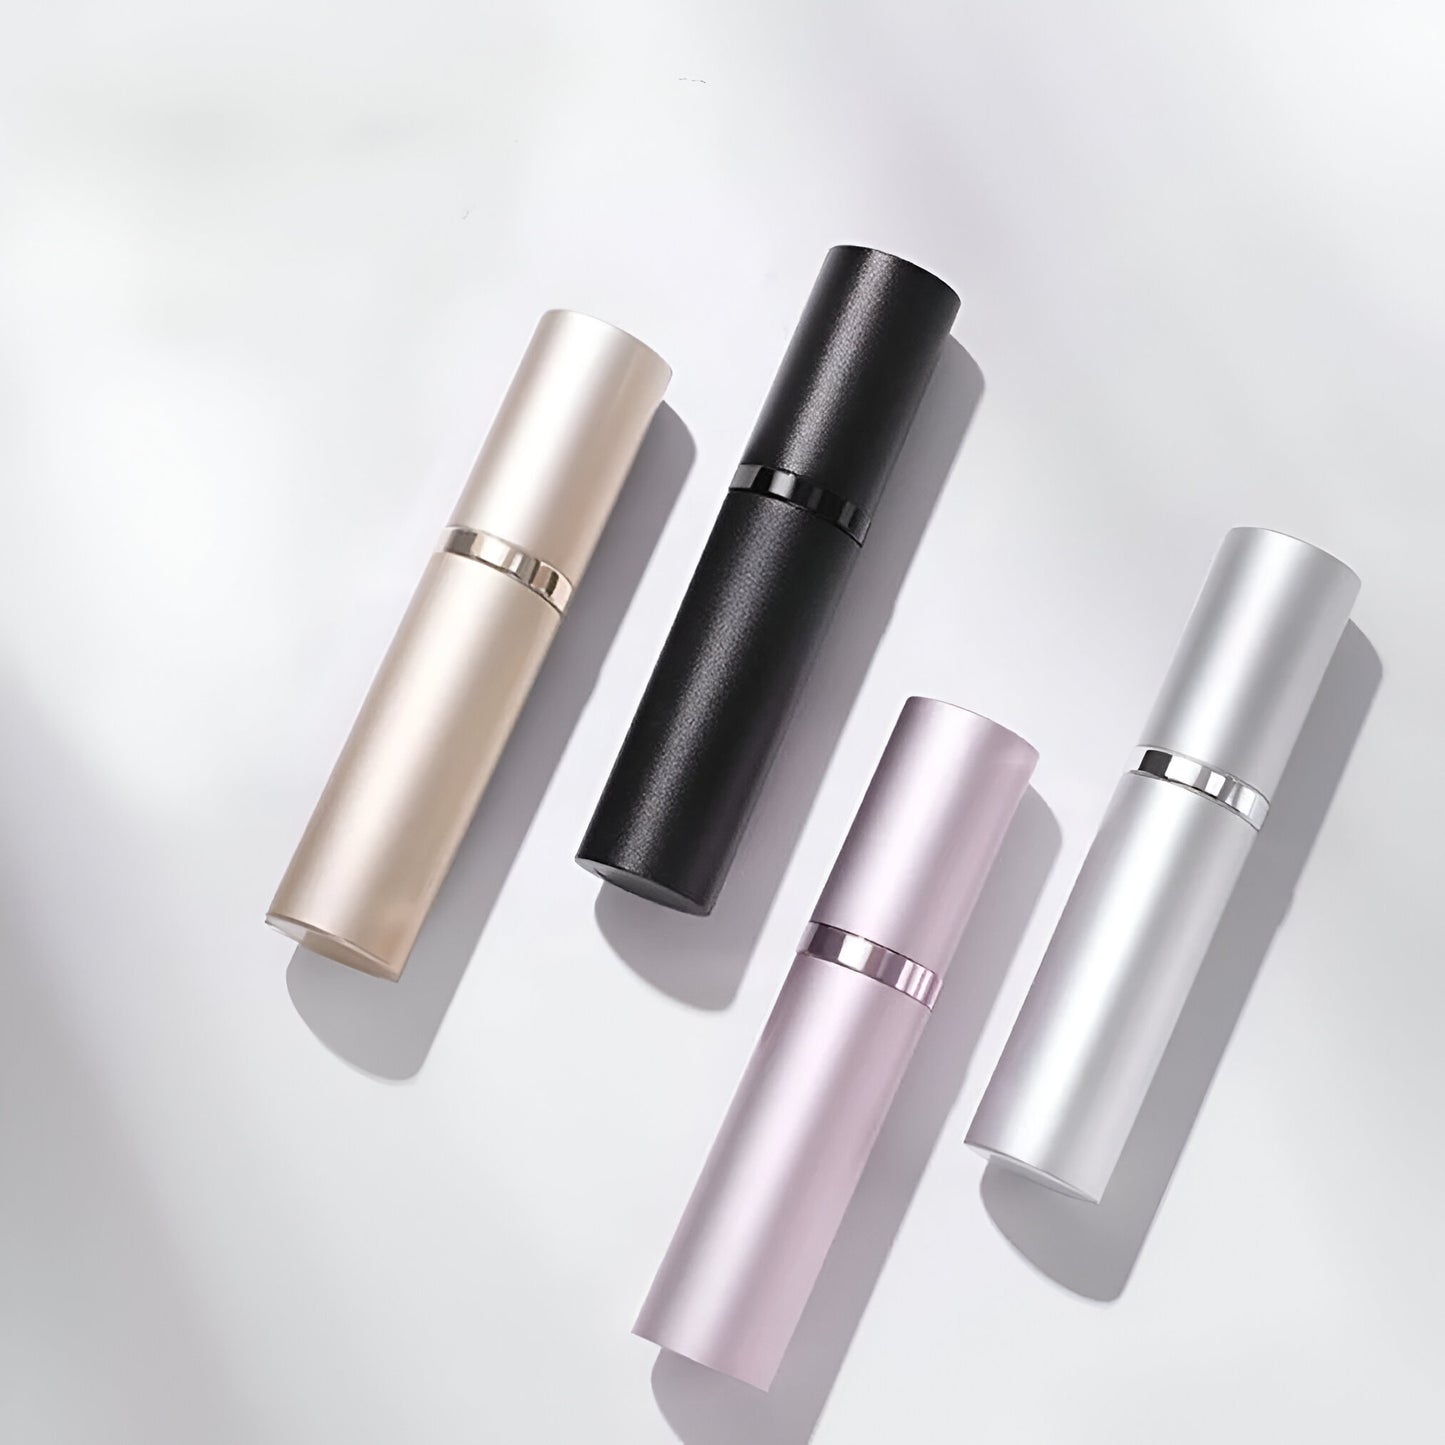 Spritz & Go: 8ml Perfume Atomizer for Jet-Setters and Trendsetters